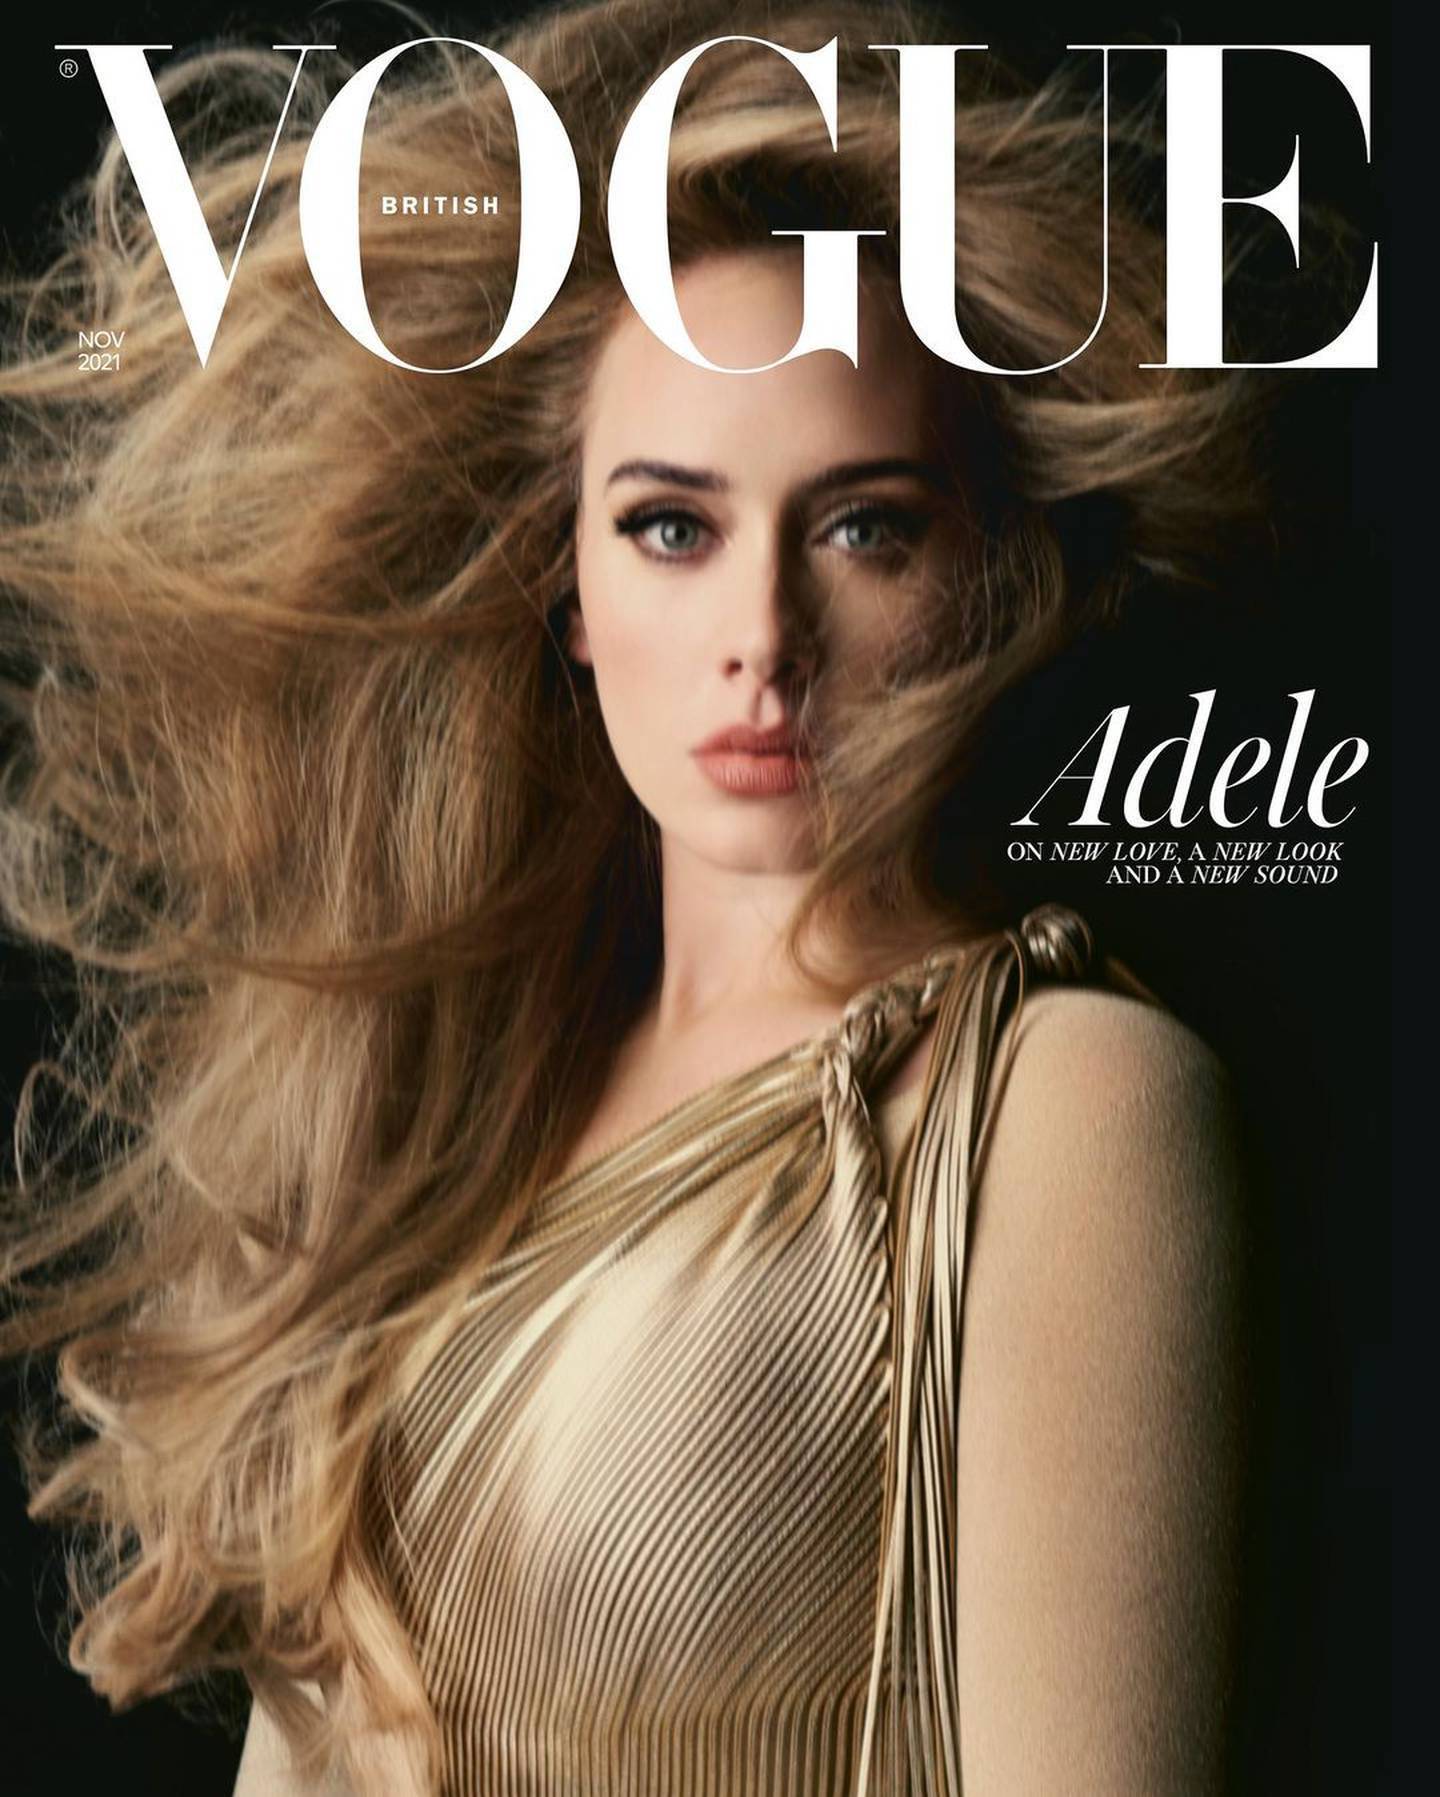 Adele on the cover of British Vogue